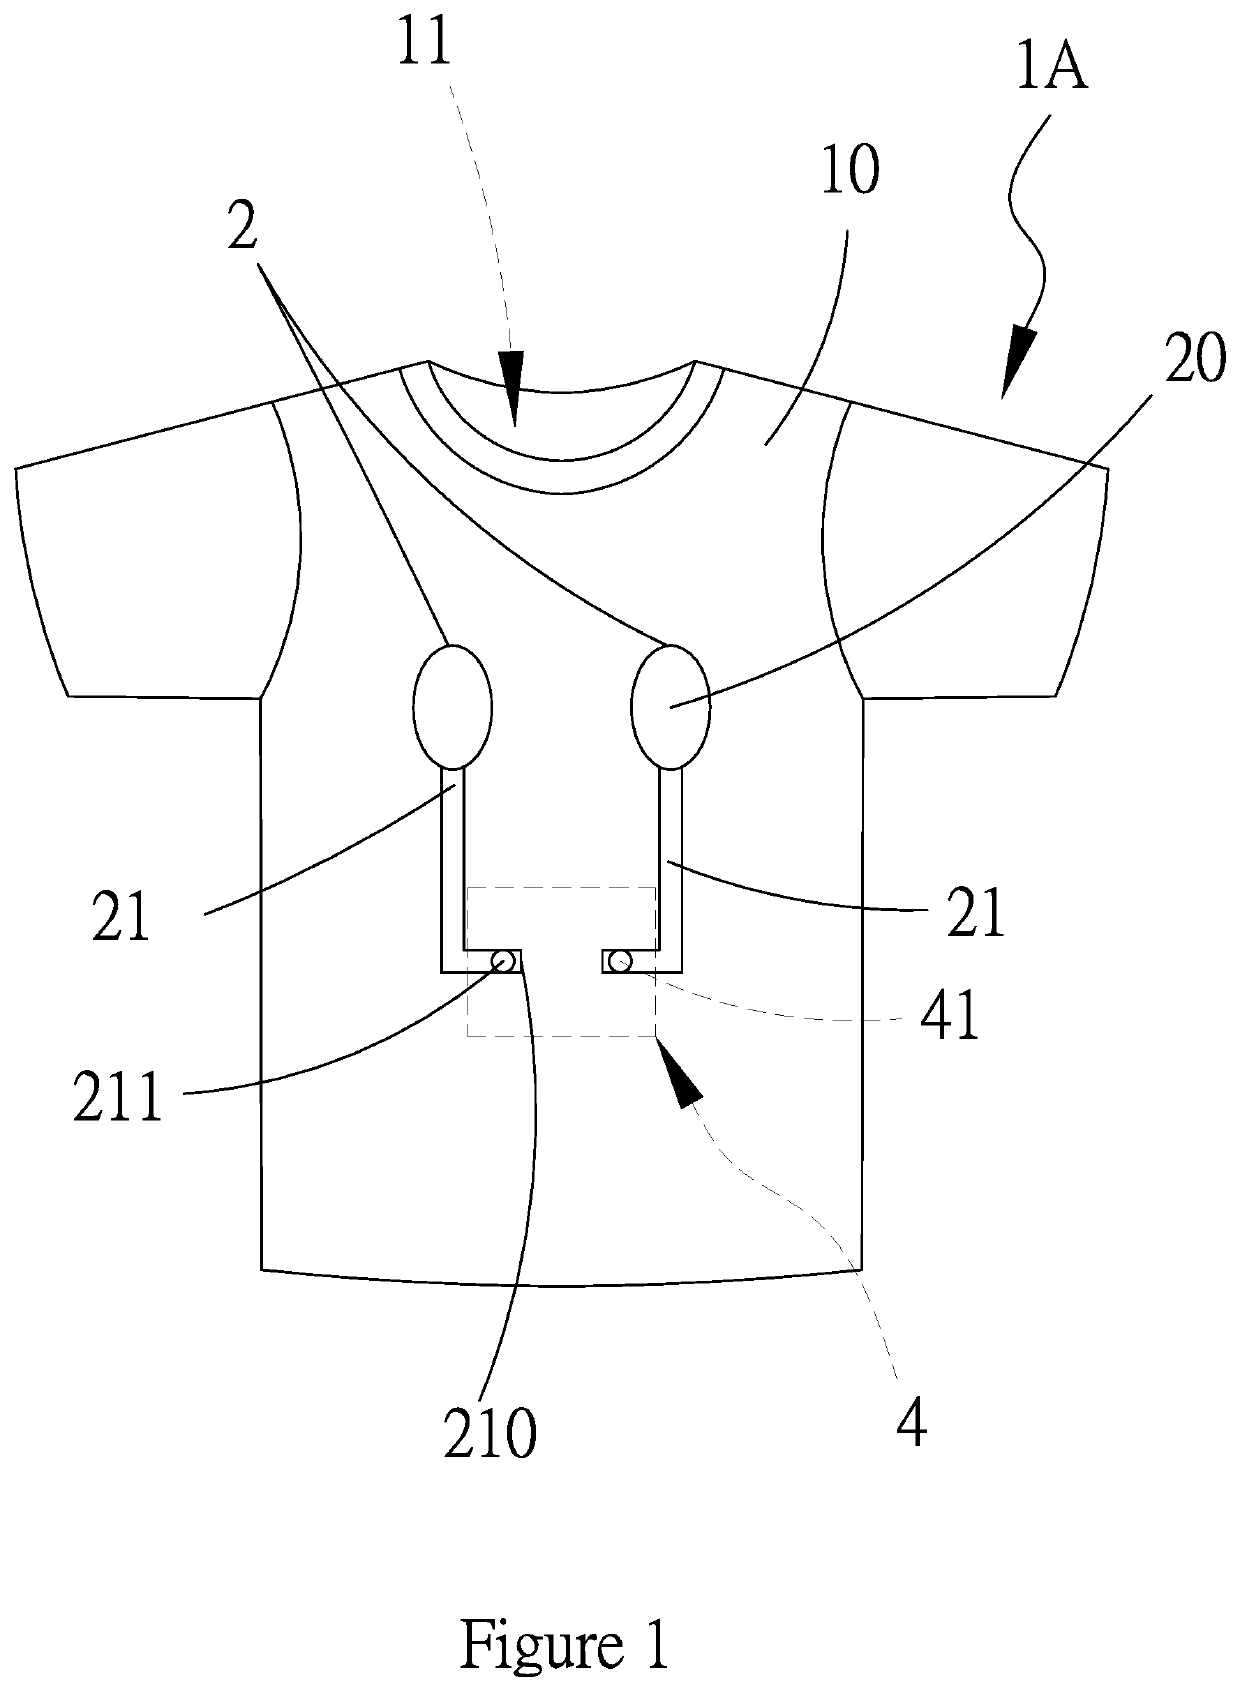 Smart clothing for sensing heart physiological activities and lung respiratory conditions